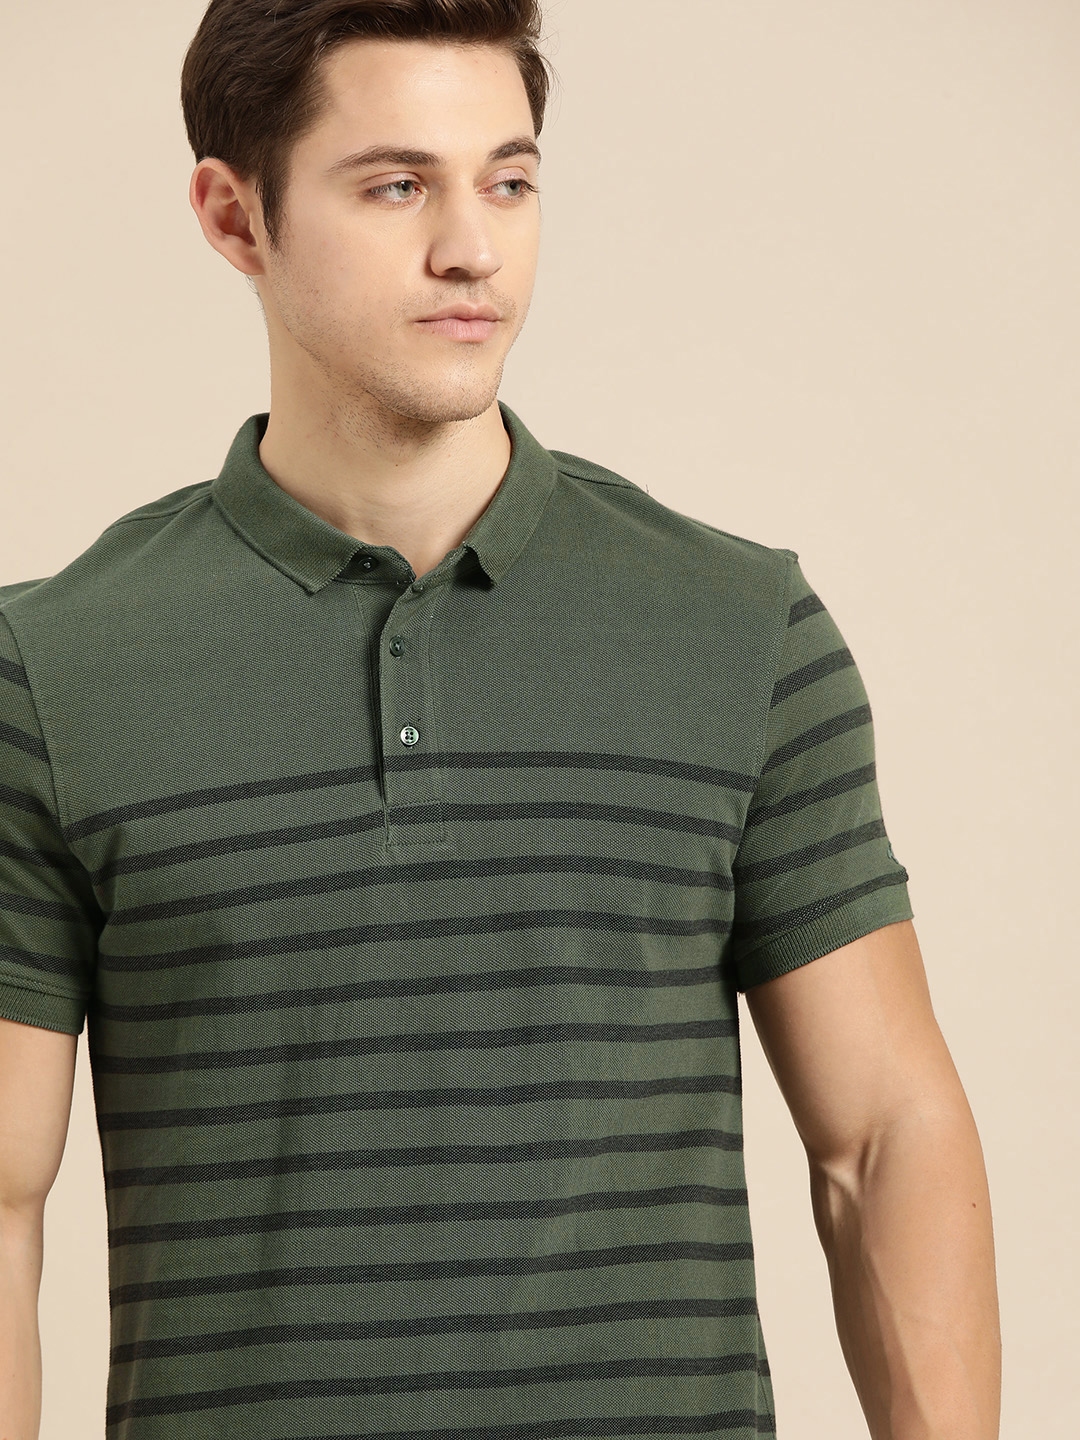 Buy Ether Men Olive Green & Black Pure Cotton Striped Polo Collar T ...